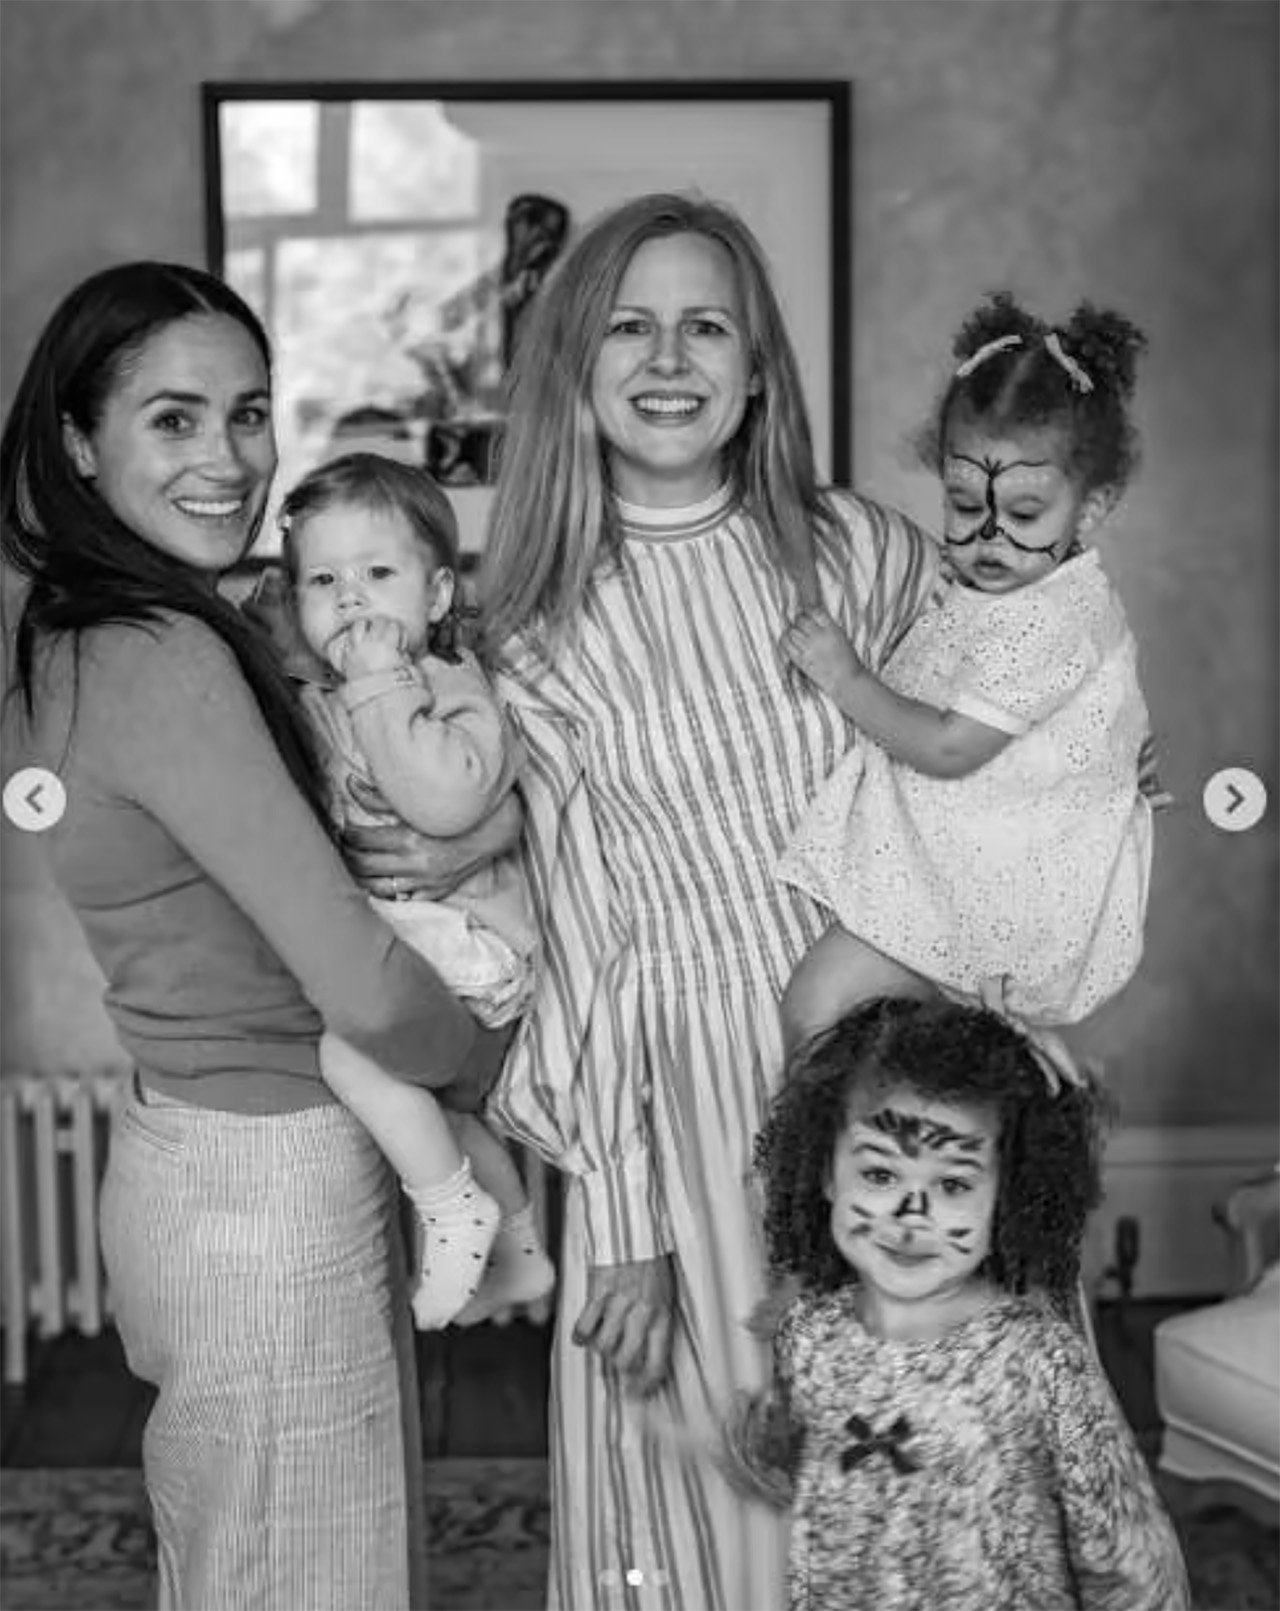 Meghan Markle holds Lilibet as she poses with a family friend and her two daughters in face paint